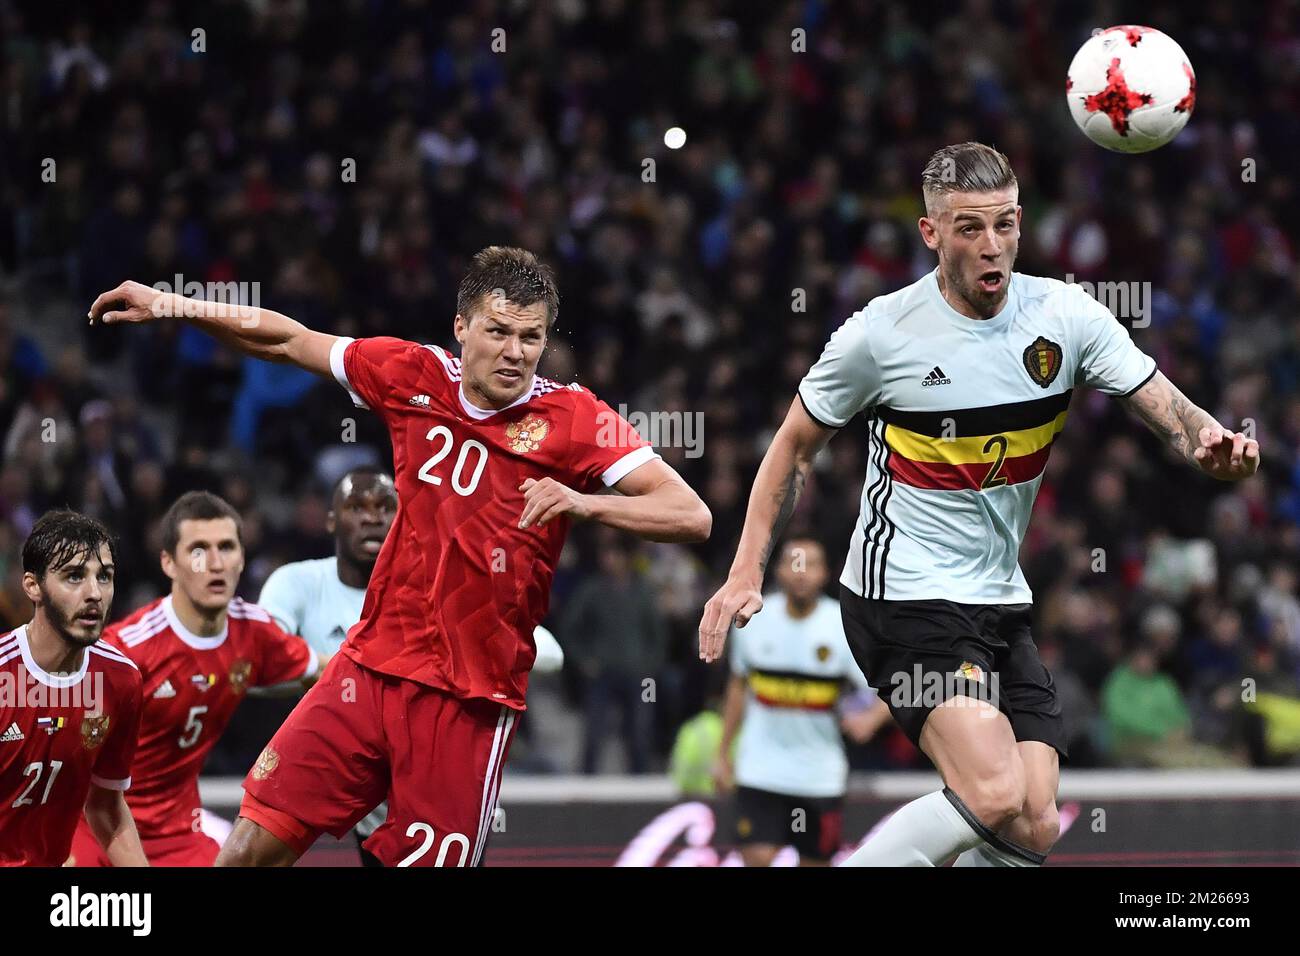 Russia's Maksim Kanunnikov and Belgium's Toby Alderweireld fight for the ball during a friendly game between Belgium's Red Devils and Russia, on Tuesday 28 March 2017, in Adler, Russia. BELGA PHOTO DIRK WAEM Stock Photo